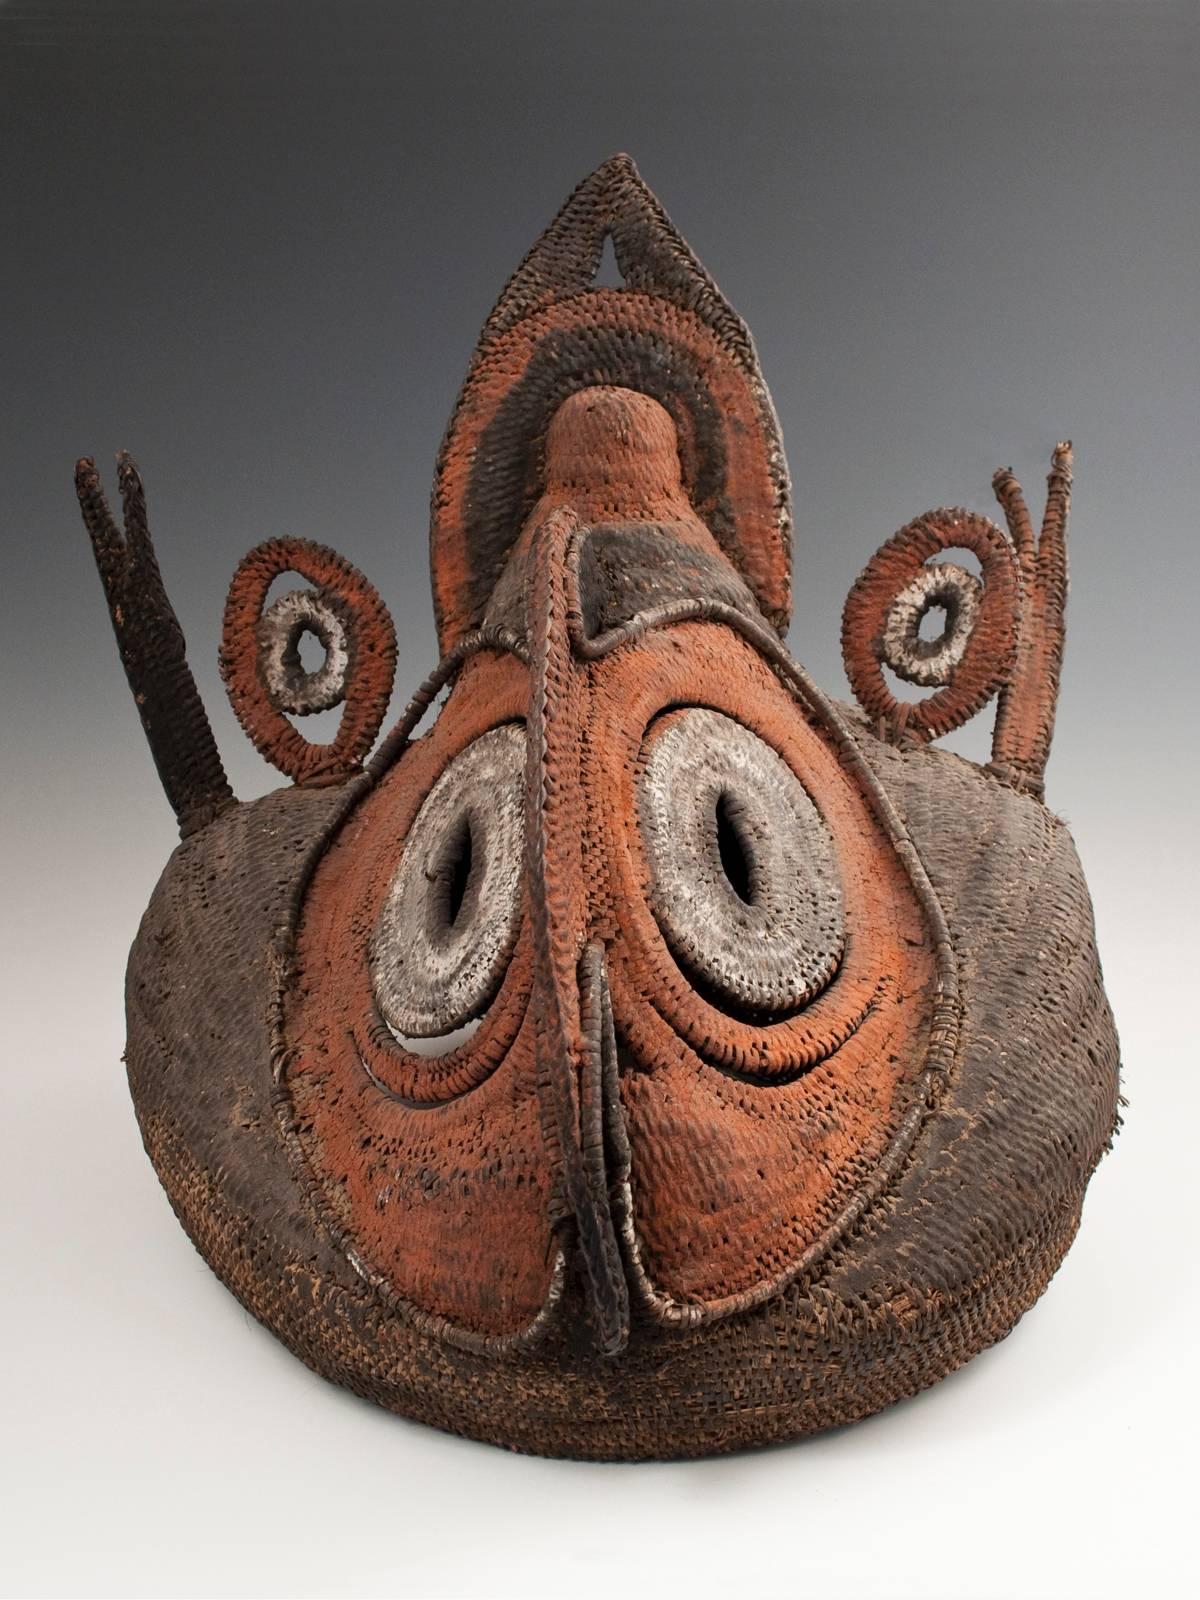 Offered by Zena Kruzick.
Early to Mid-20th century tribal Abelam Bapa helmet mask, Papua New Guinea.

Coiled cane, natural pigments.
Measures: 15" (38 cm) high by 13" (33 cm) wide.
These "bapa" masks represented frightening